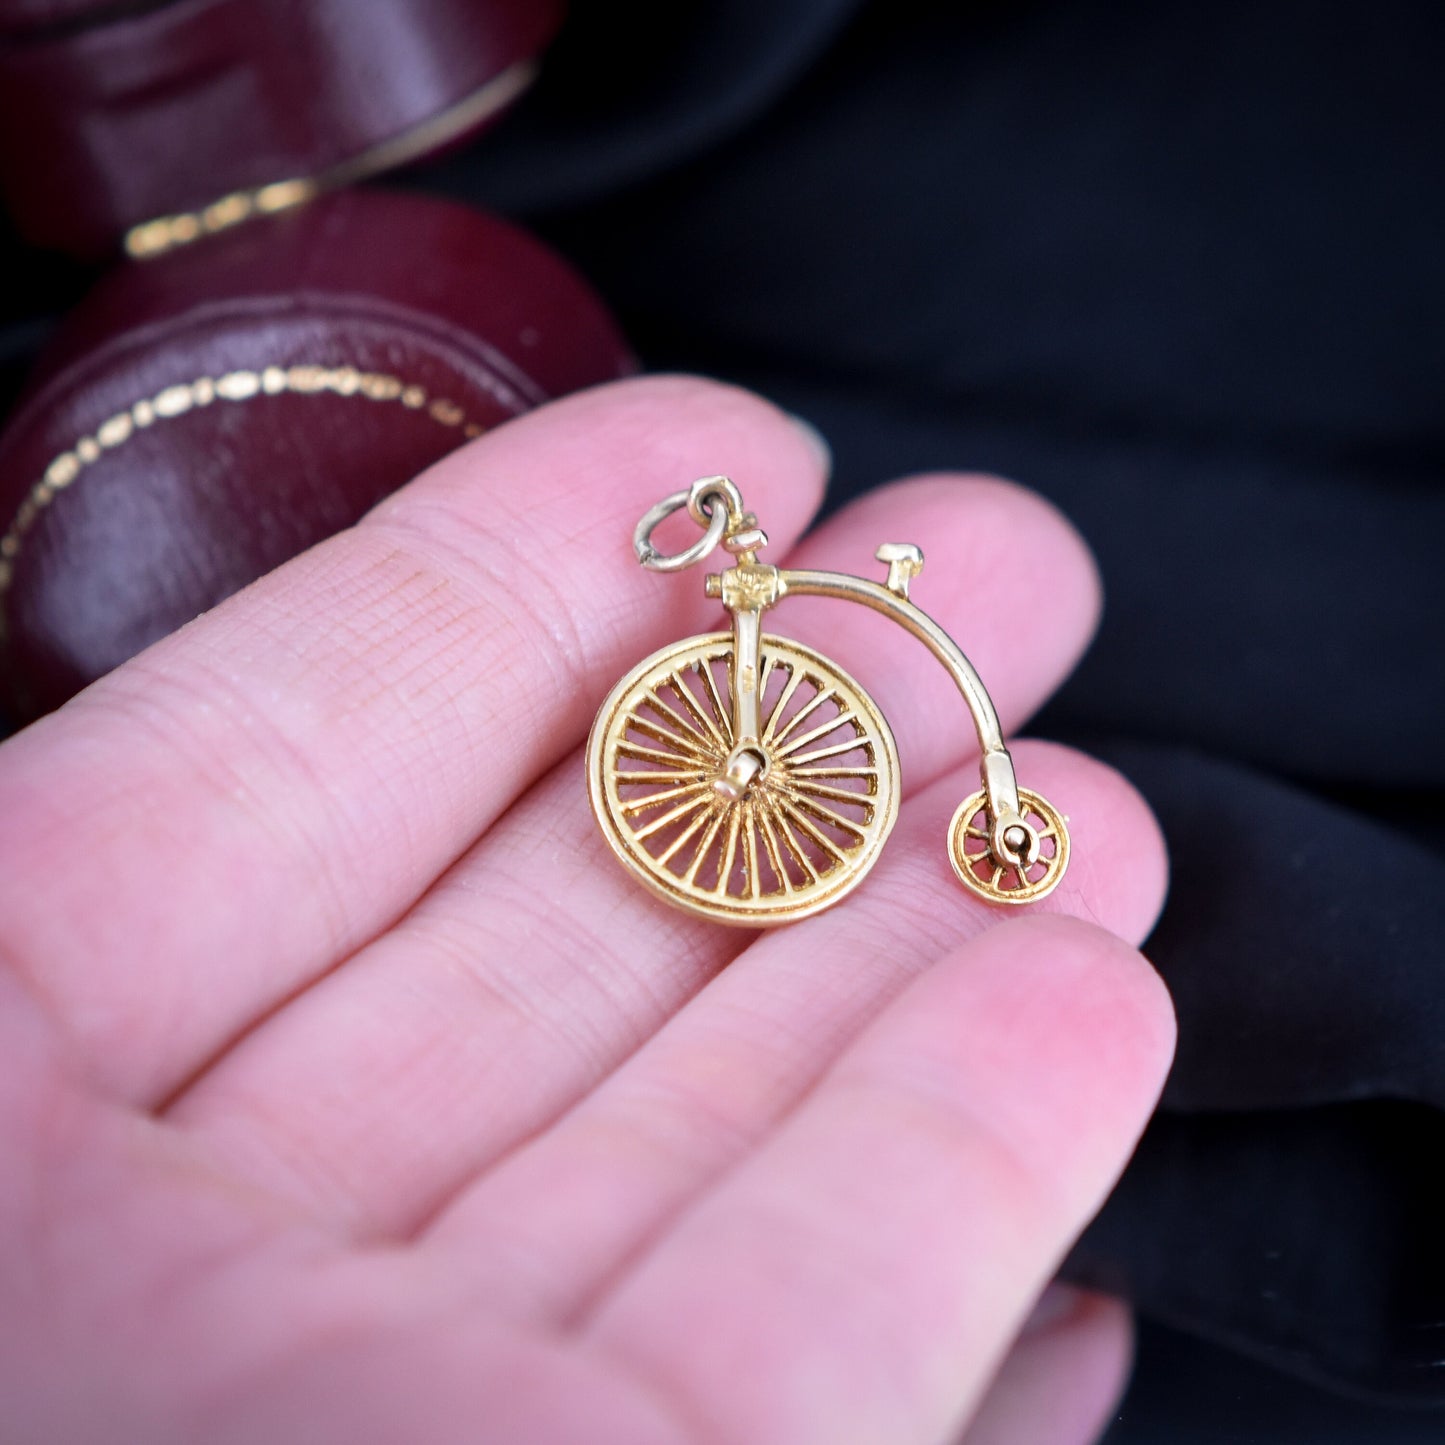 Vintage High Wheel Penny Farthing Bicycle 9ct 9K Yellow Gold Charm Pendant (2.3g) - Dated 1973